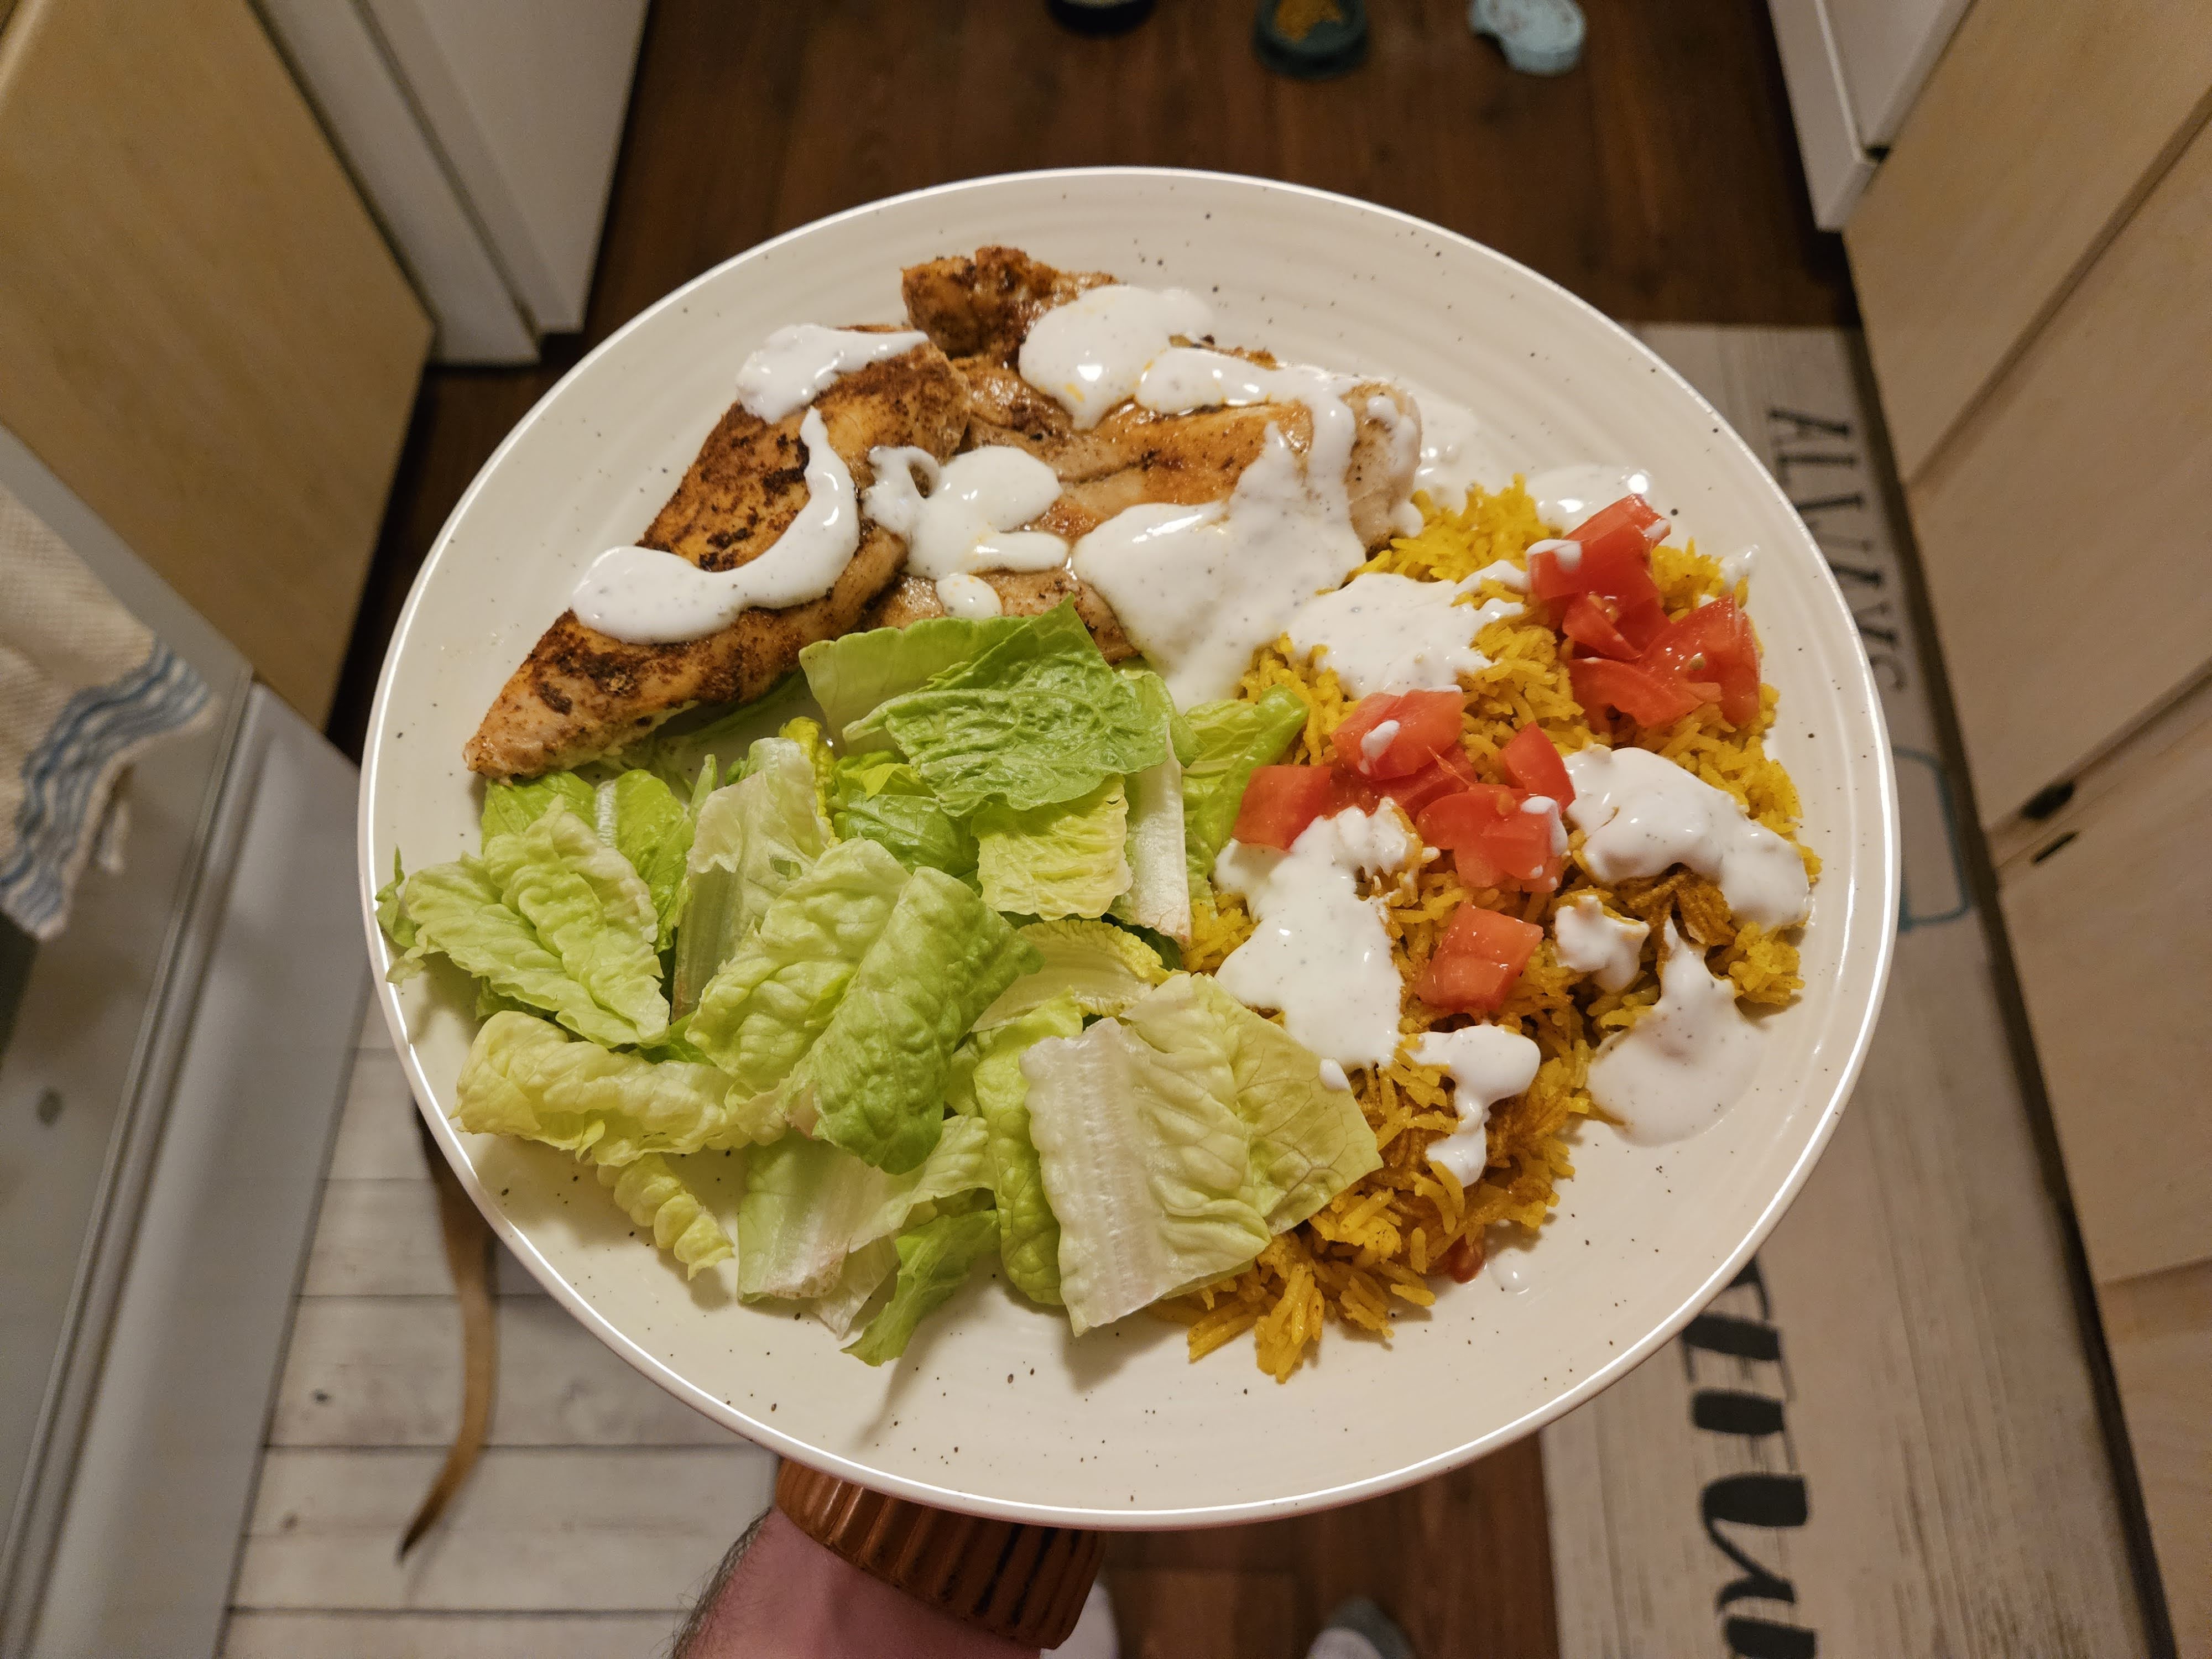 Samsung Galaxy S23 Plus photo of chicken, salad, and rice on a plate.